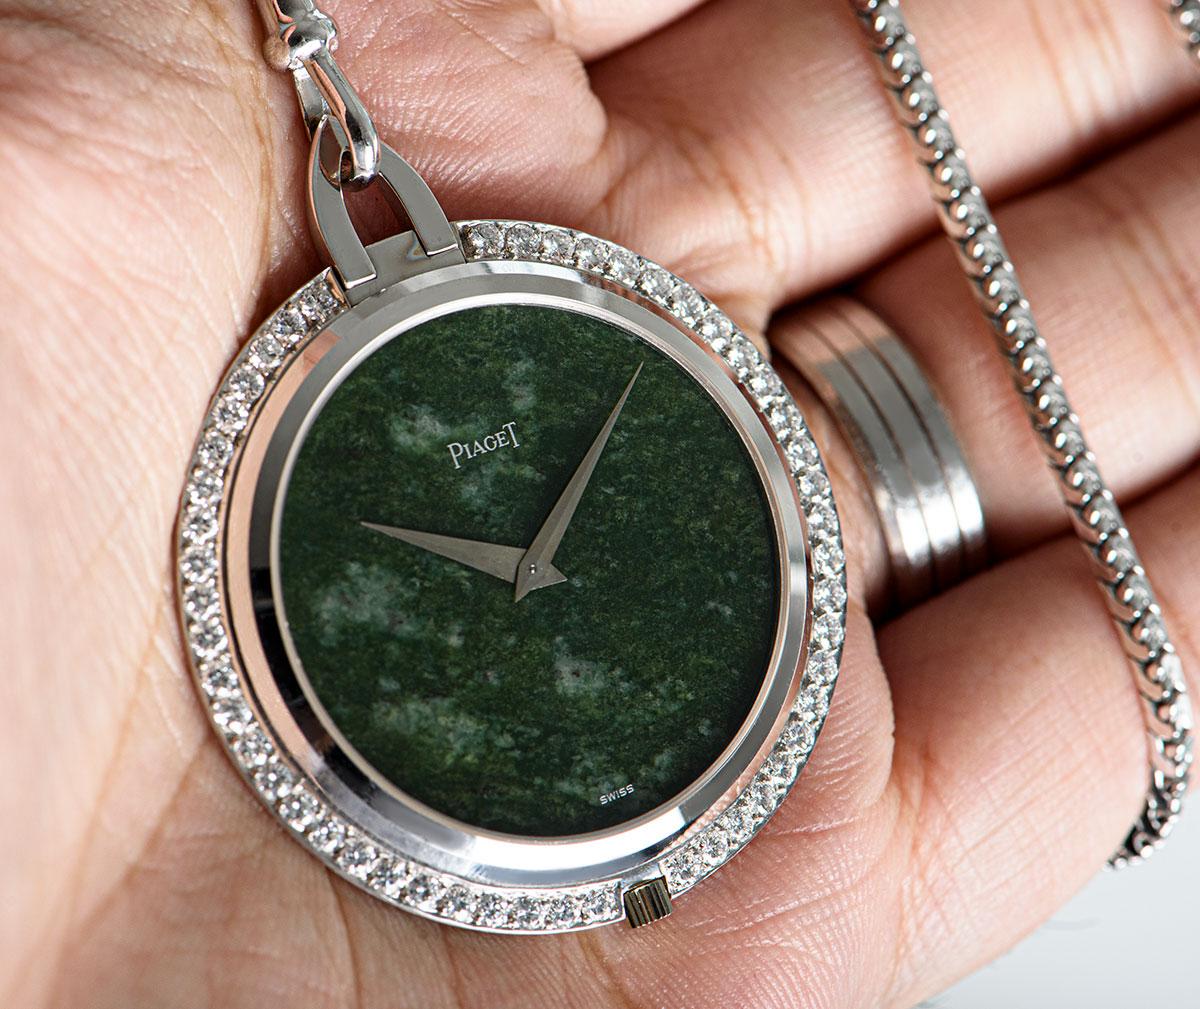 A Very Rare 43 mm 18k White Gold Open Face Vintage Gents Pocket Watch, jade dial, a fixed 18k white gold bezel set with 50 round brilliant cut diamonds (~1.5ct), an 18k white gold chain, sapphire glass, an 18k white gold caseback highly engraved